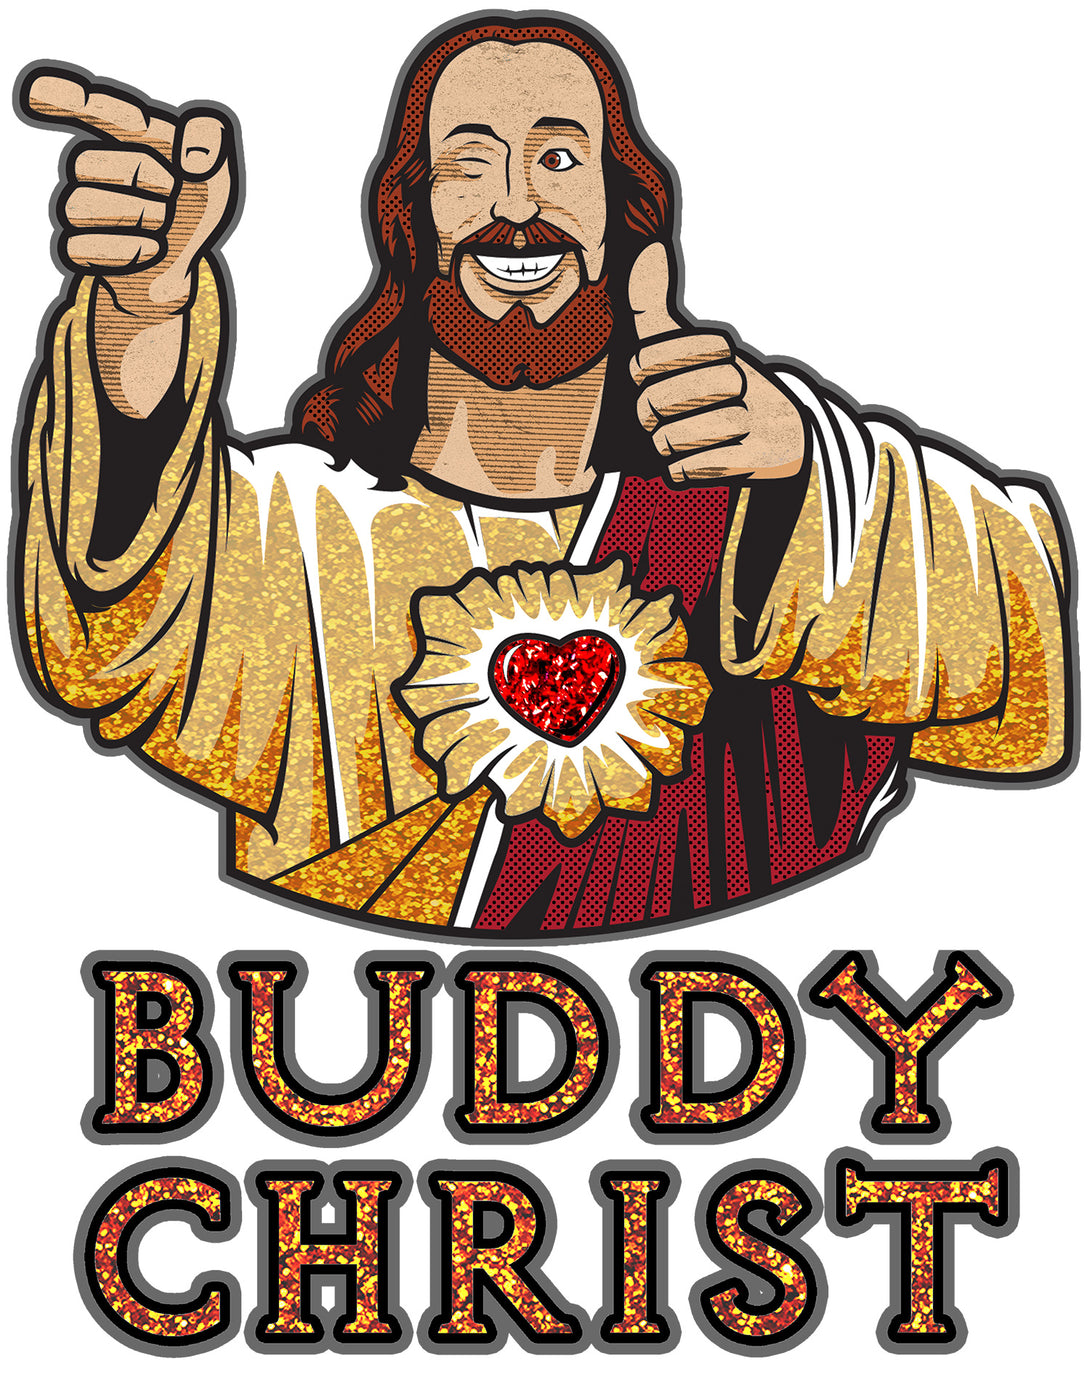 Kevin Smith View Askewniverse Buddy Christ Got Golden Wow Edition Official Men's T-Shirt White - Urban Species Design Close Up